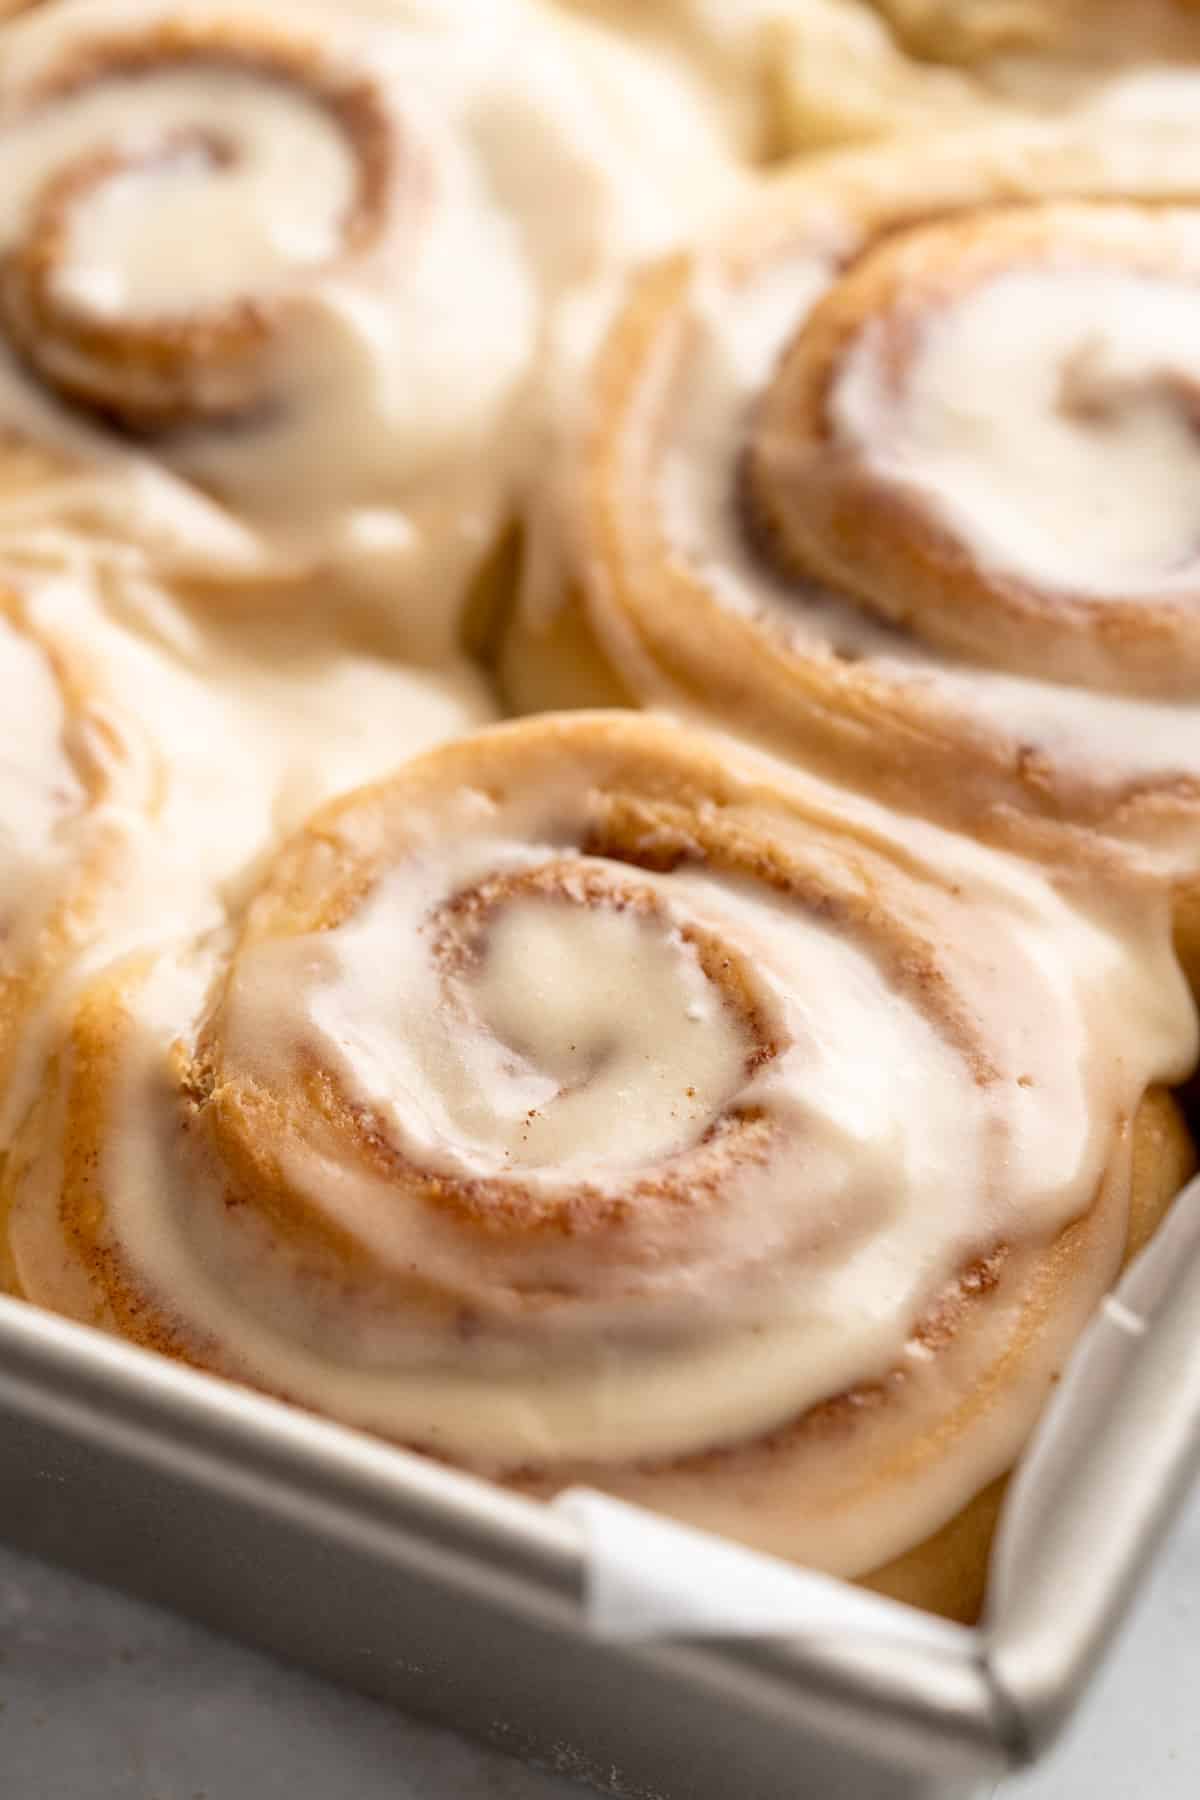 Closeup view of cinnamon roll with icing.